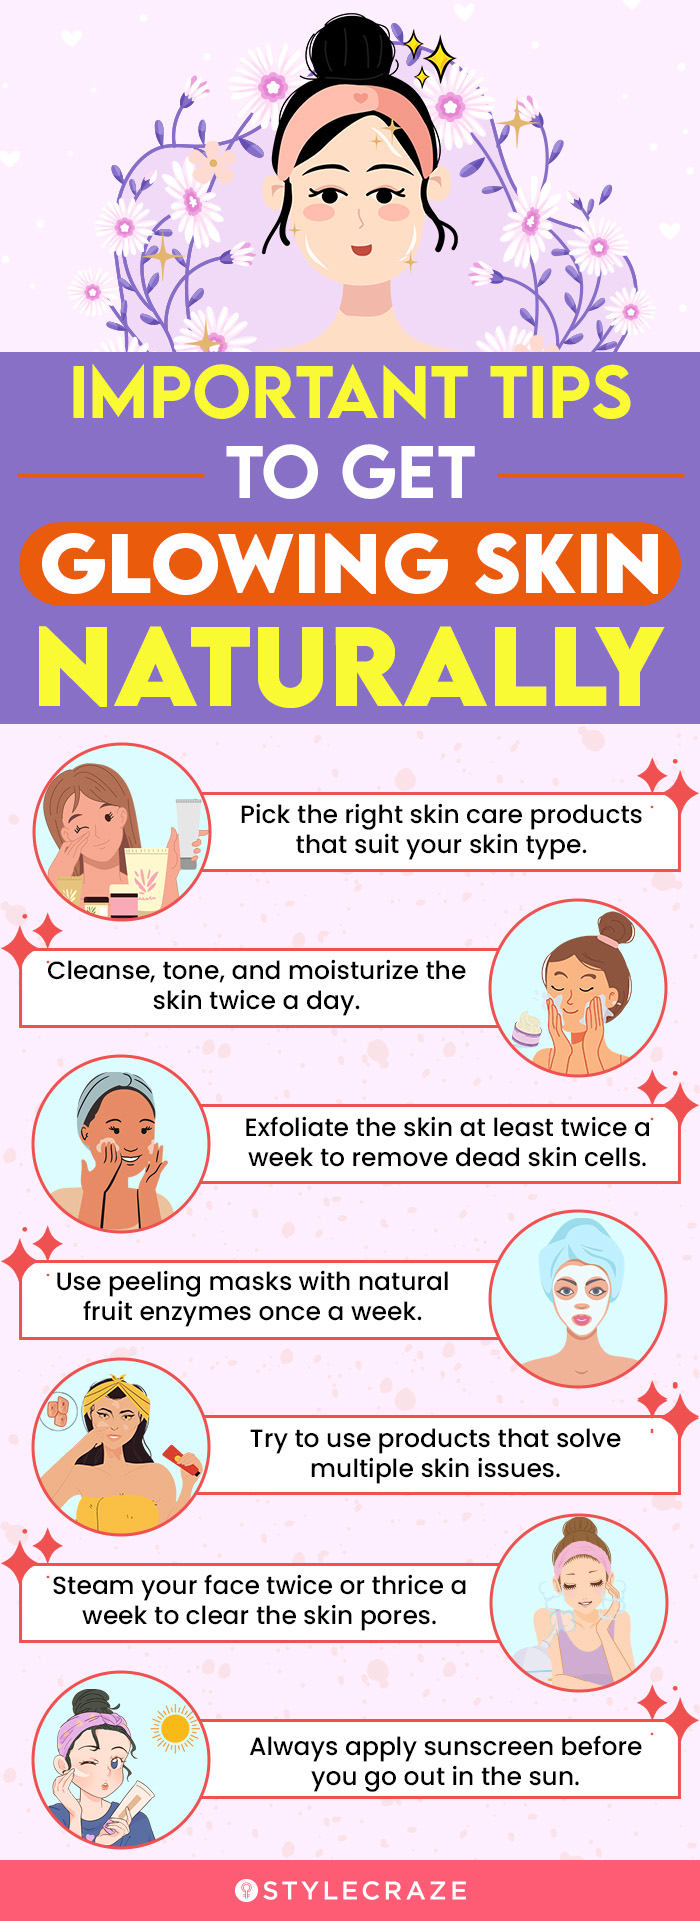 important tips to get glowing skin naturally [infographic]